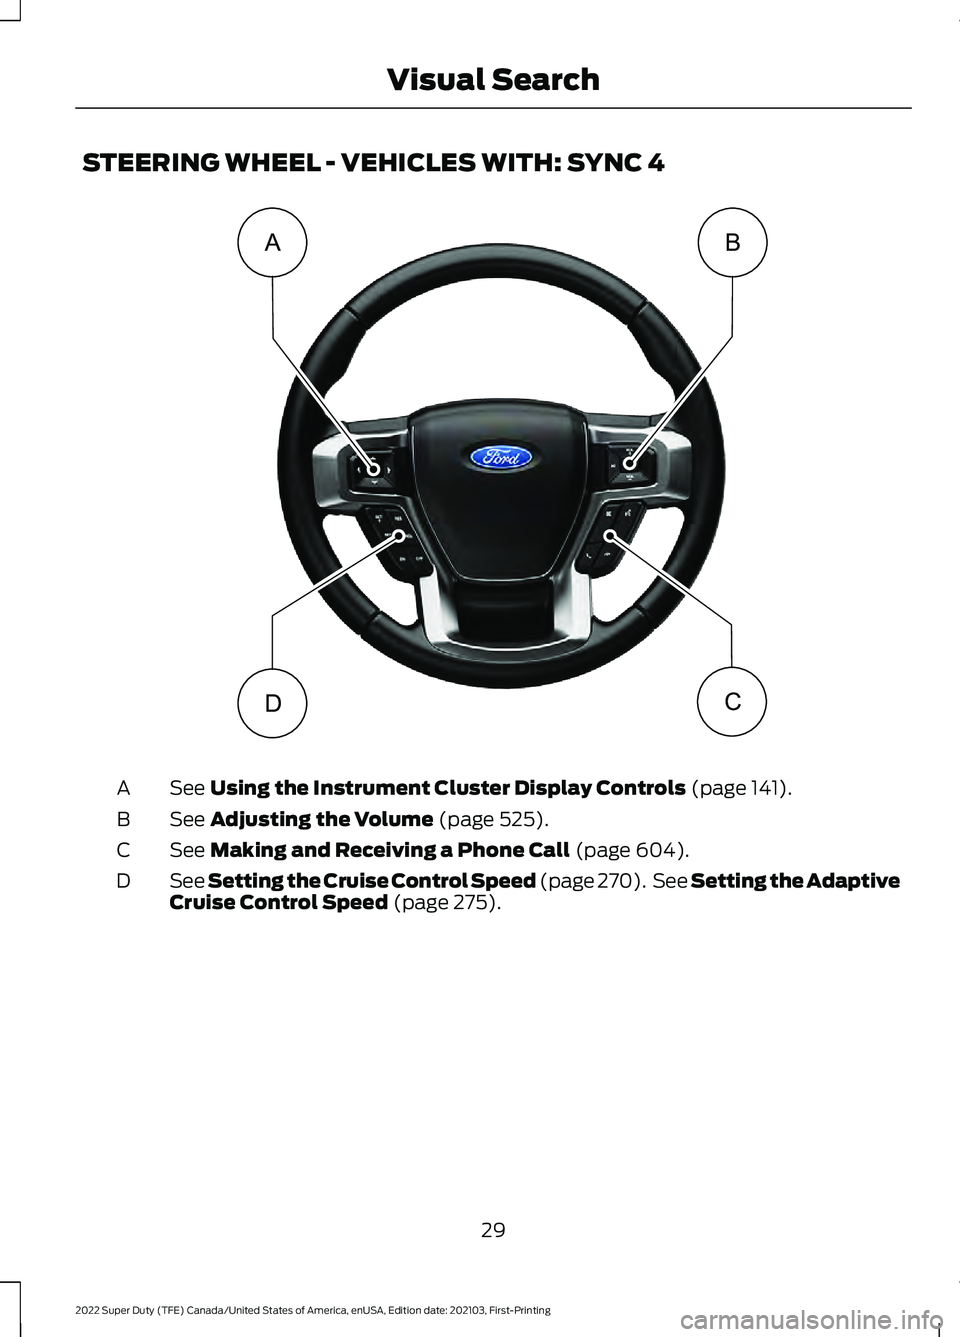 FORD F-450 2022 Owners Guide STEERING WHEEL - VEHICLES WITH: SYNC 4
See Using the Instrument Cluster Display Controls (page 141).
A
See 
Adjusting the Volume (page 525).
B
See 
Making and Receiving a Phone Call (page 604).
C
See 